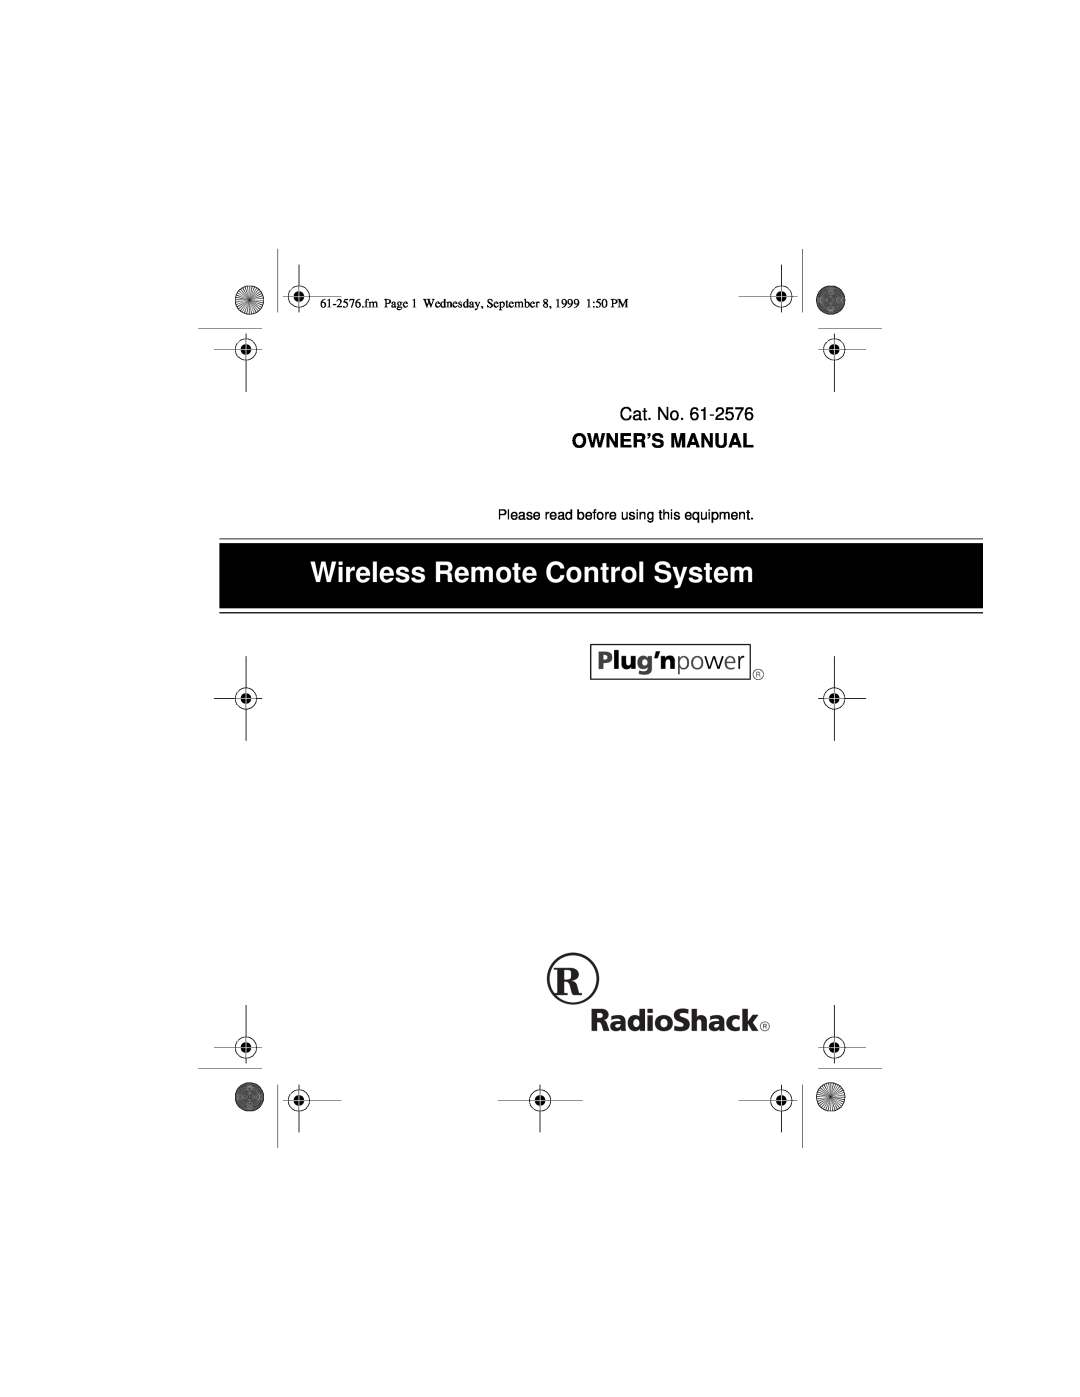 Radio Shack Wireless Remote Control System owner manual Owner’S Manual, Please read before using this equipment 